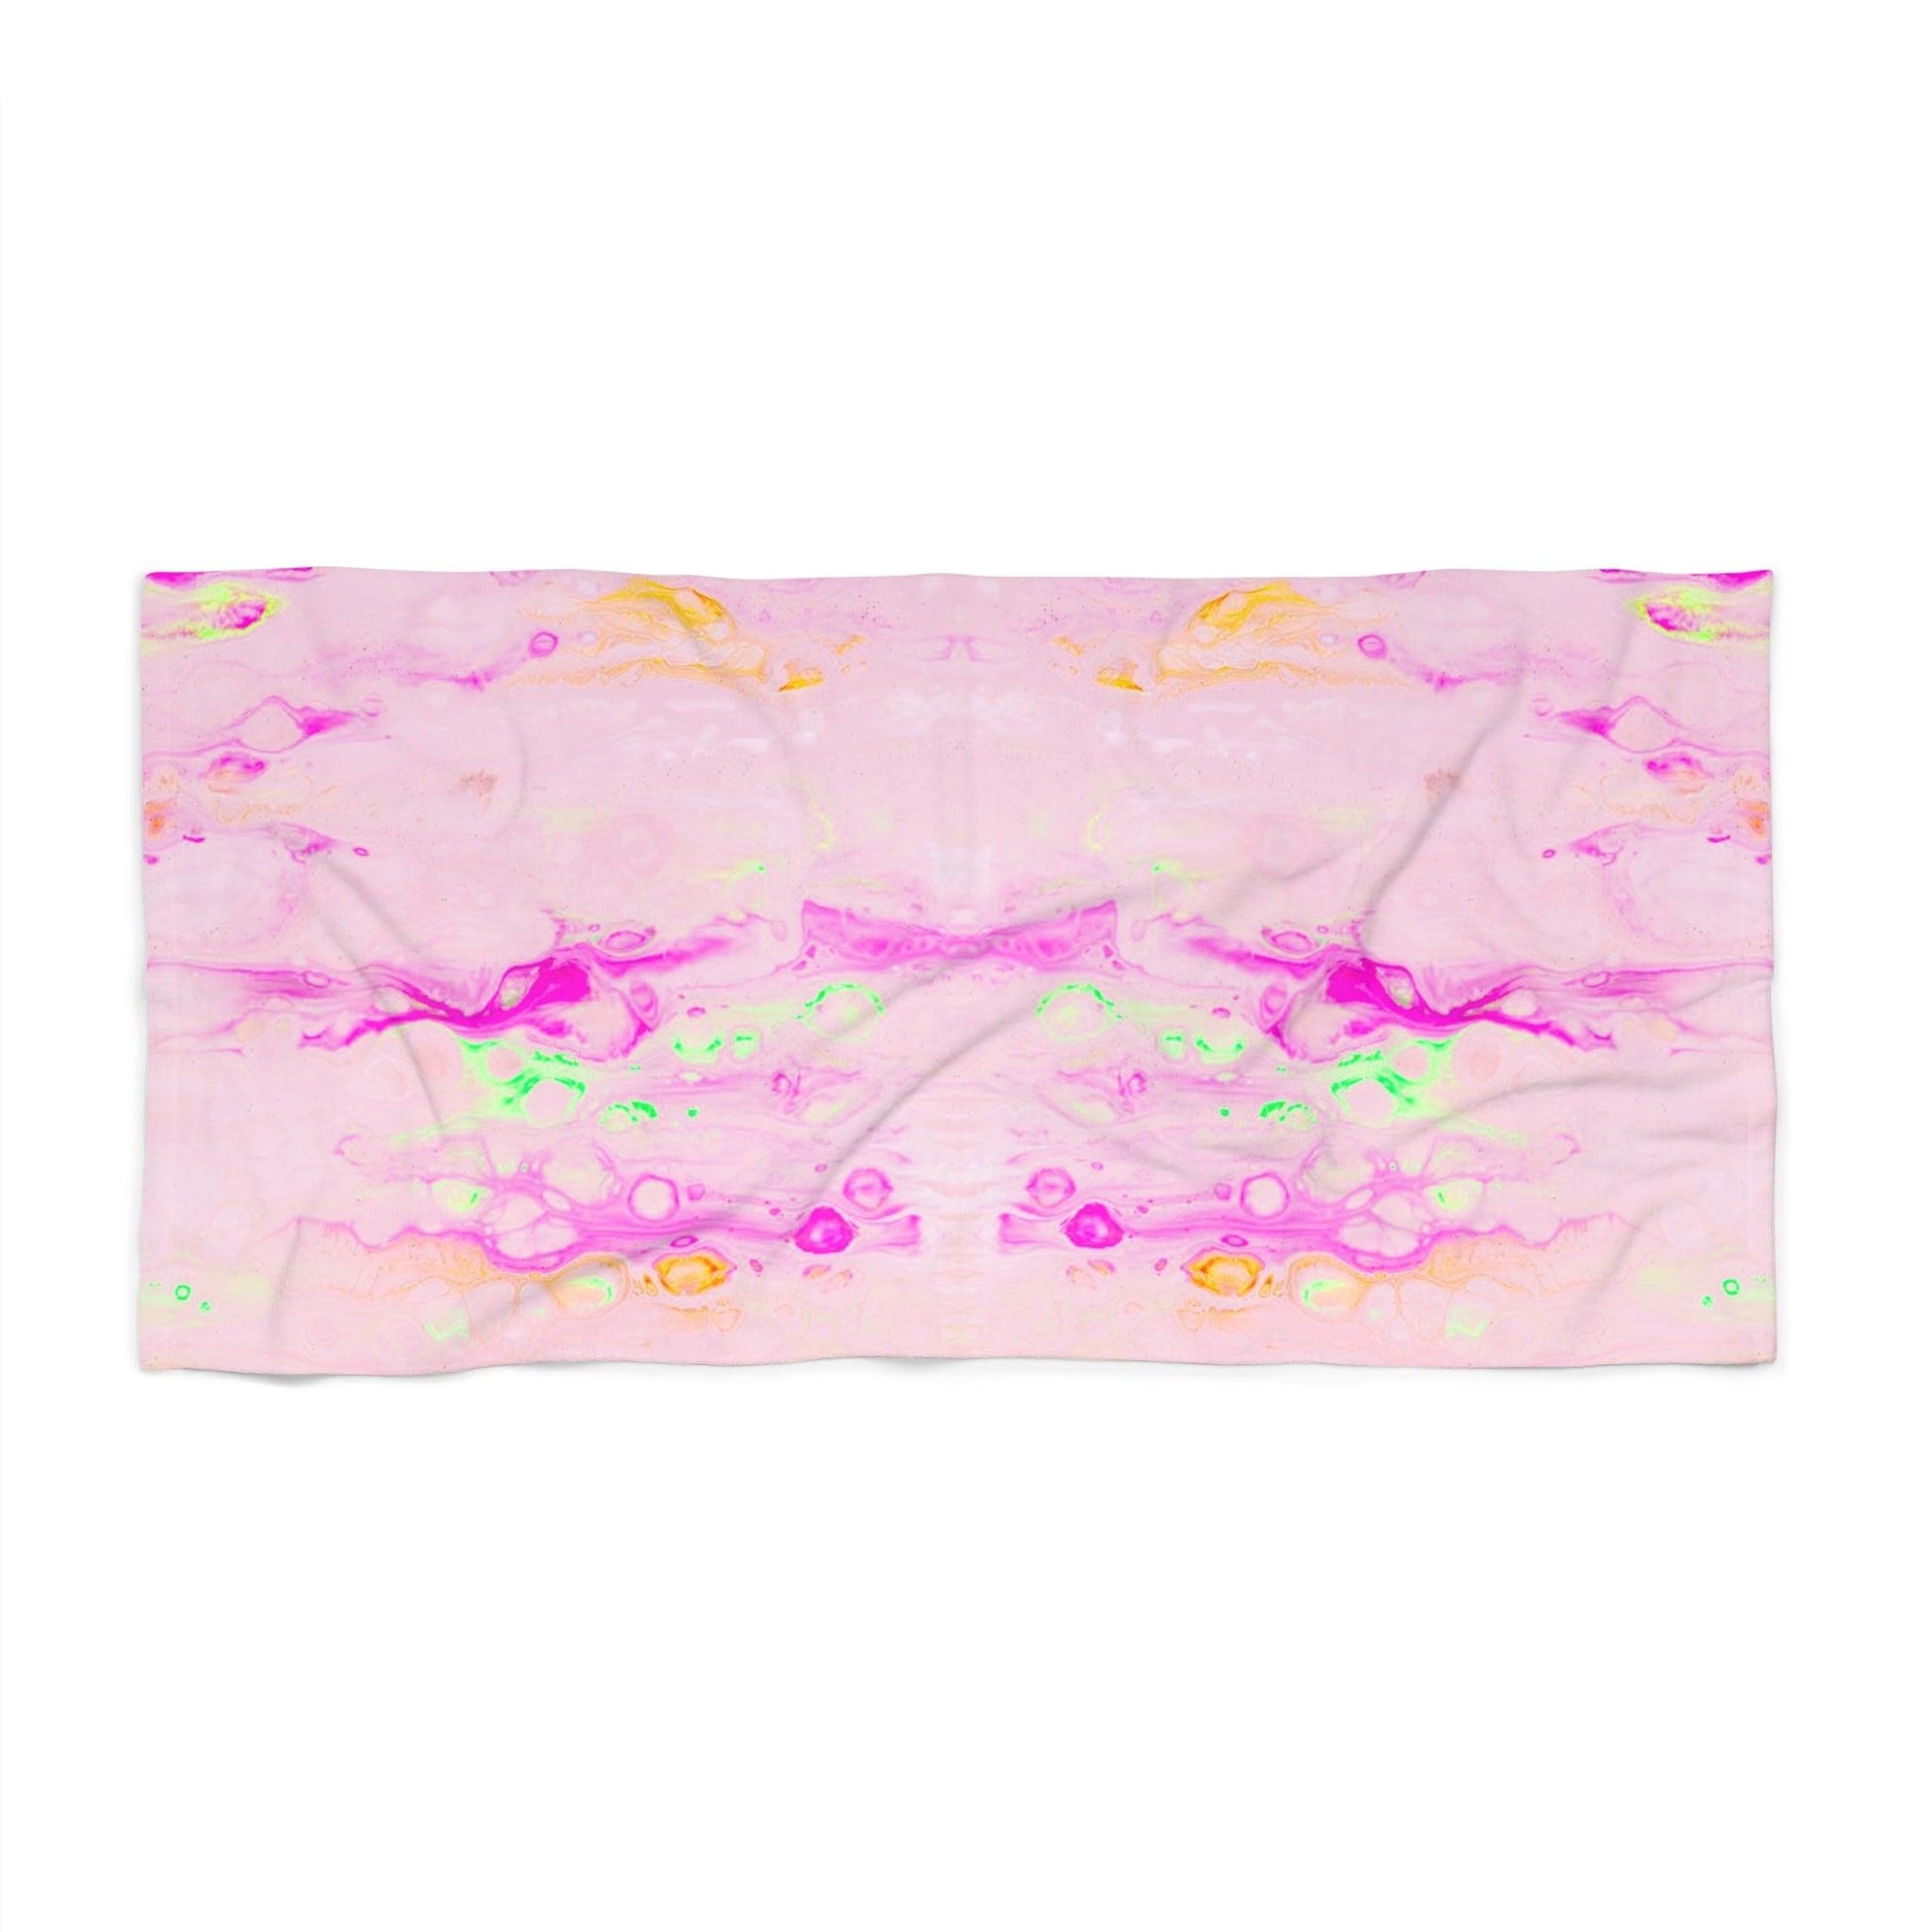 Pastel Pink Marble Beach Towel - MAIA HOMES